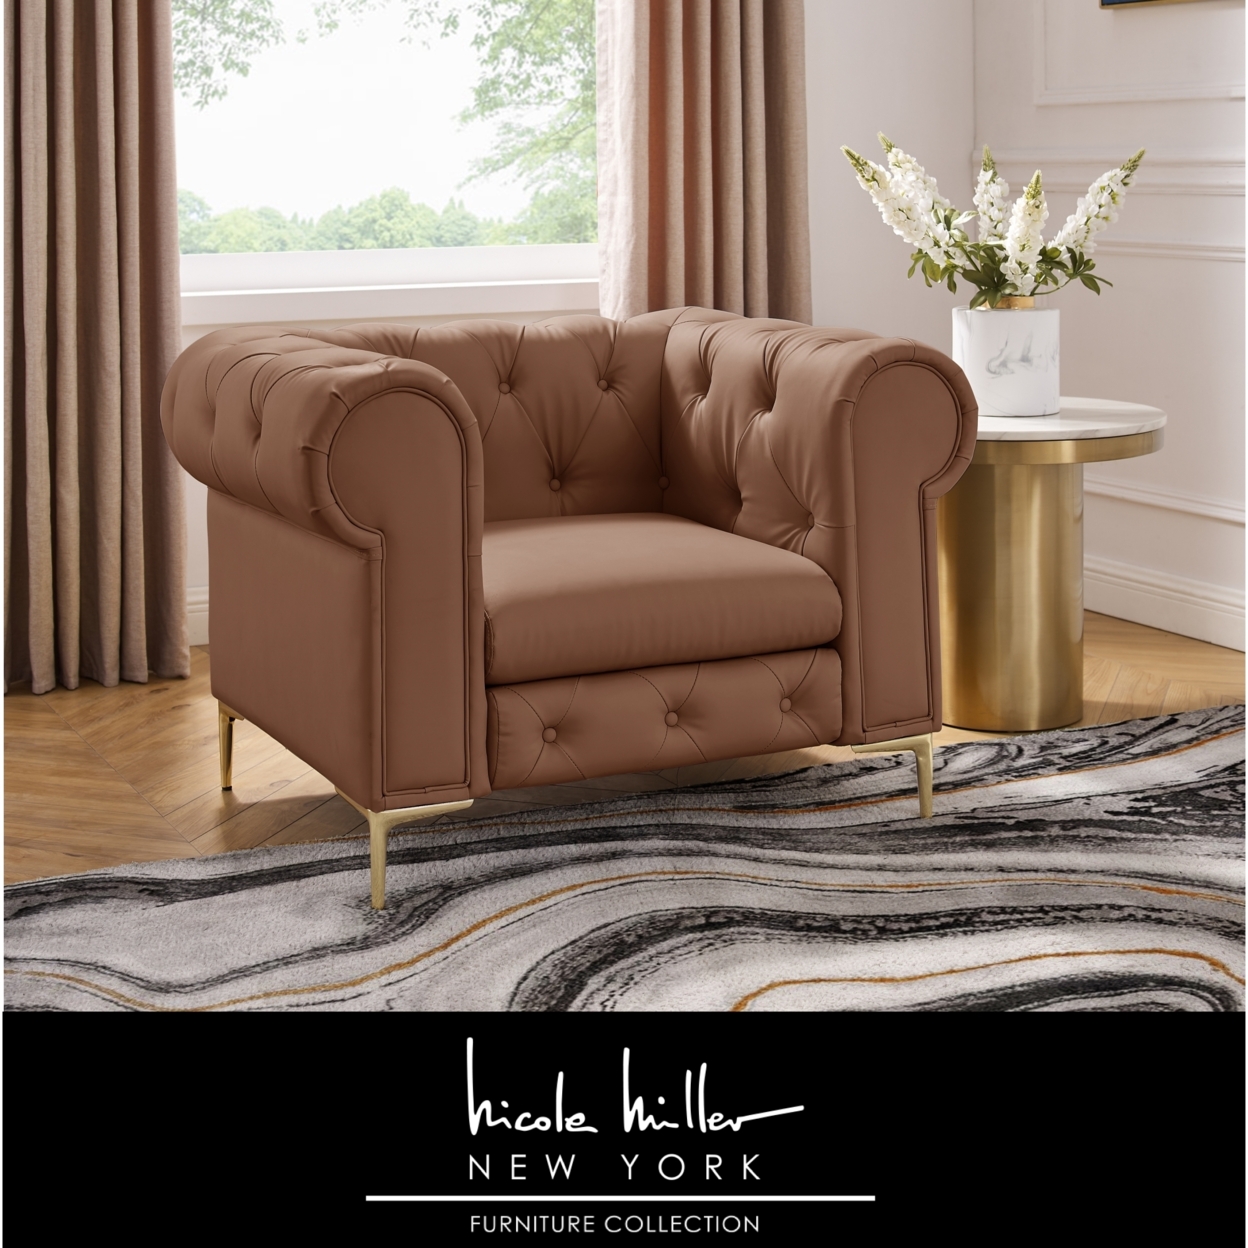 Laci Club Chair - Button Tufted - Rolled Arms - Y Leg, Sinuous Springs - Black